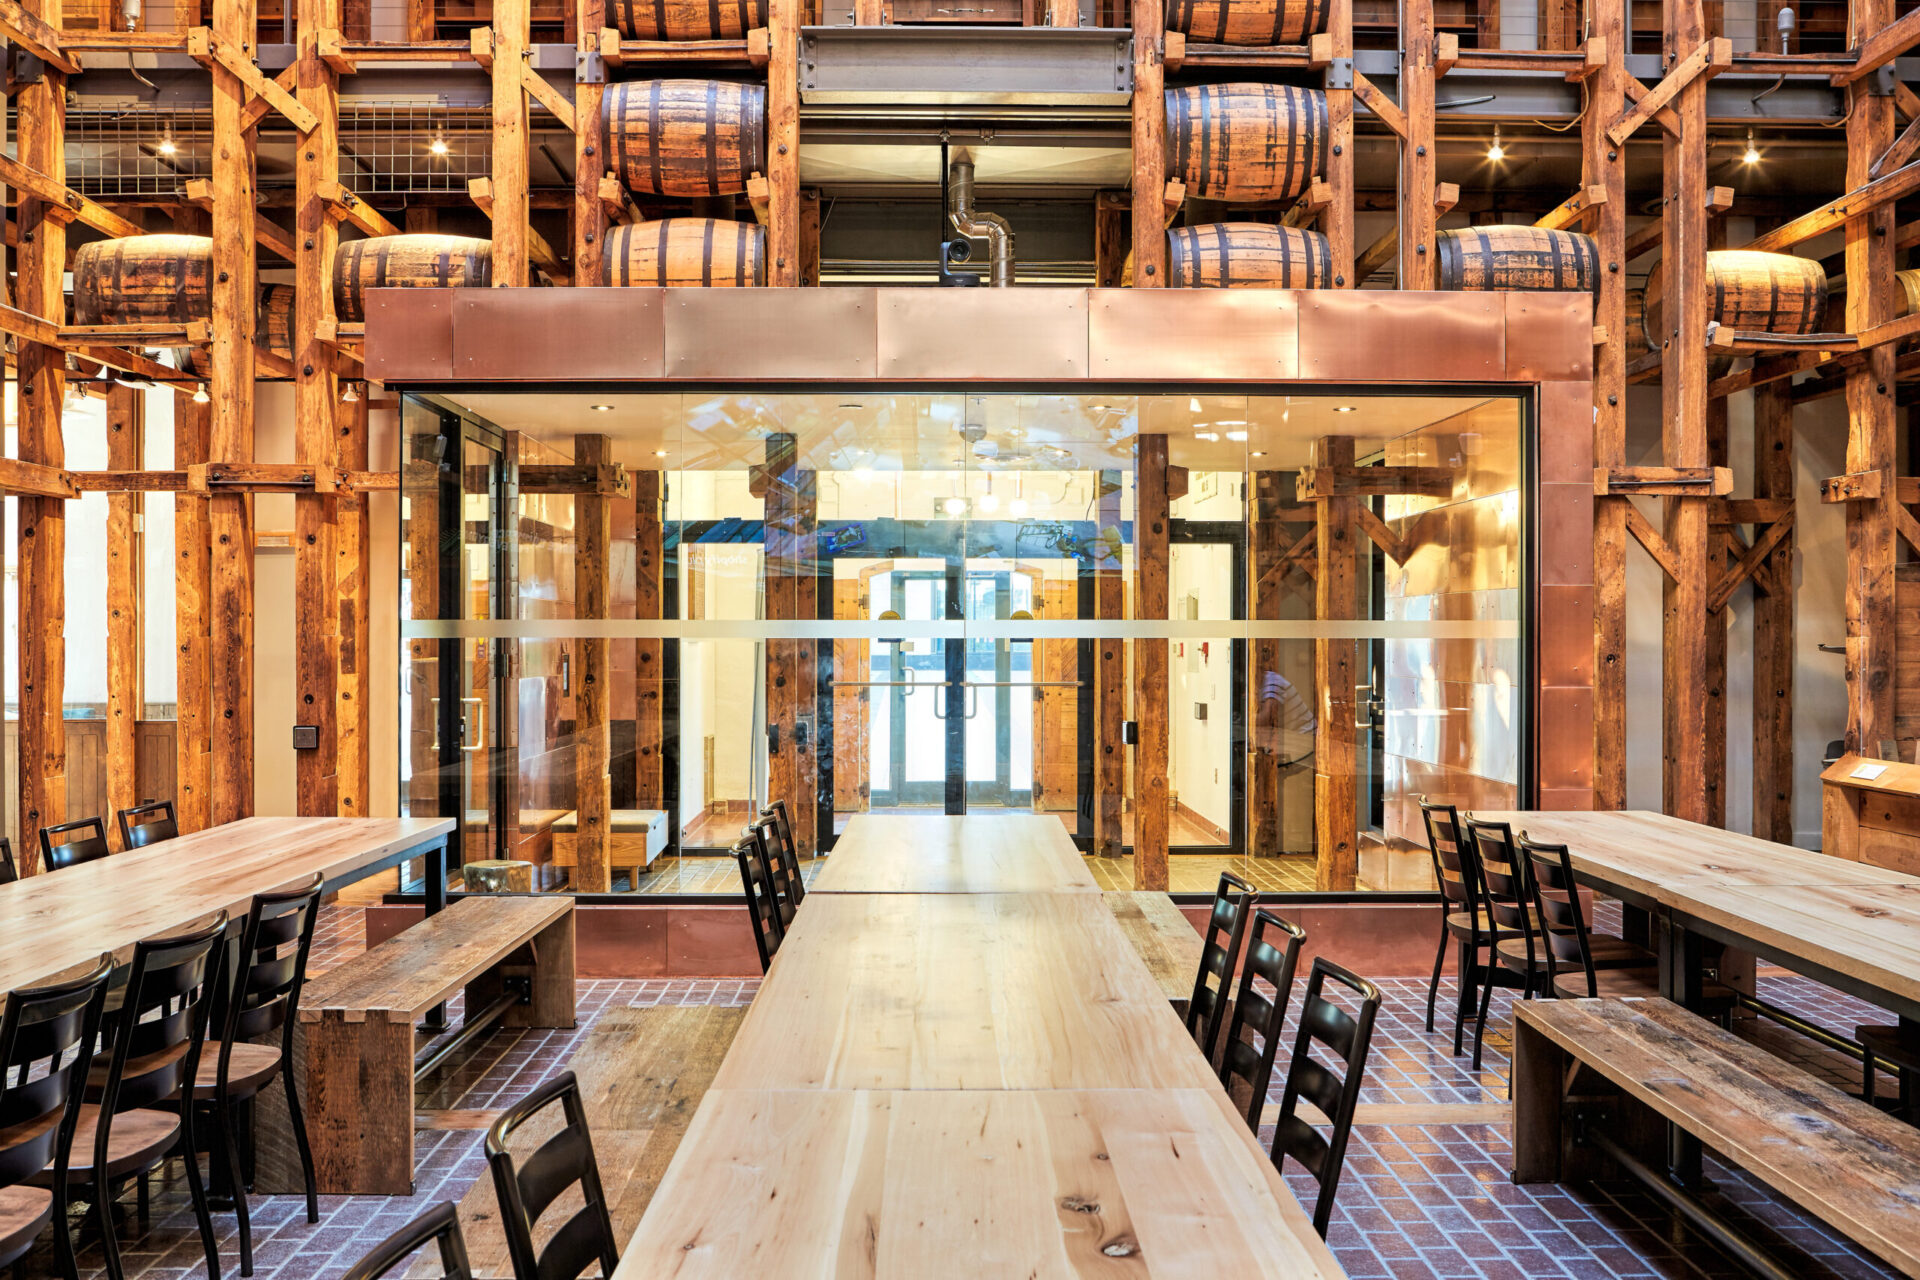 A restaurant with wooden tables and chairs featuring architectural design.